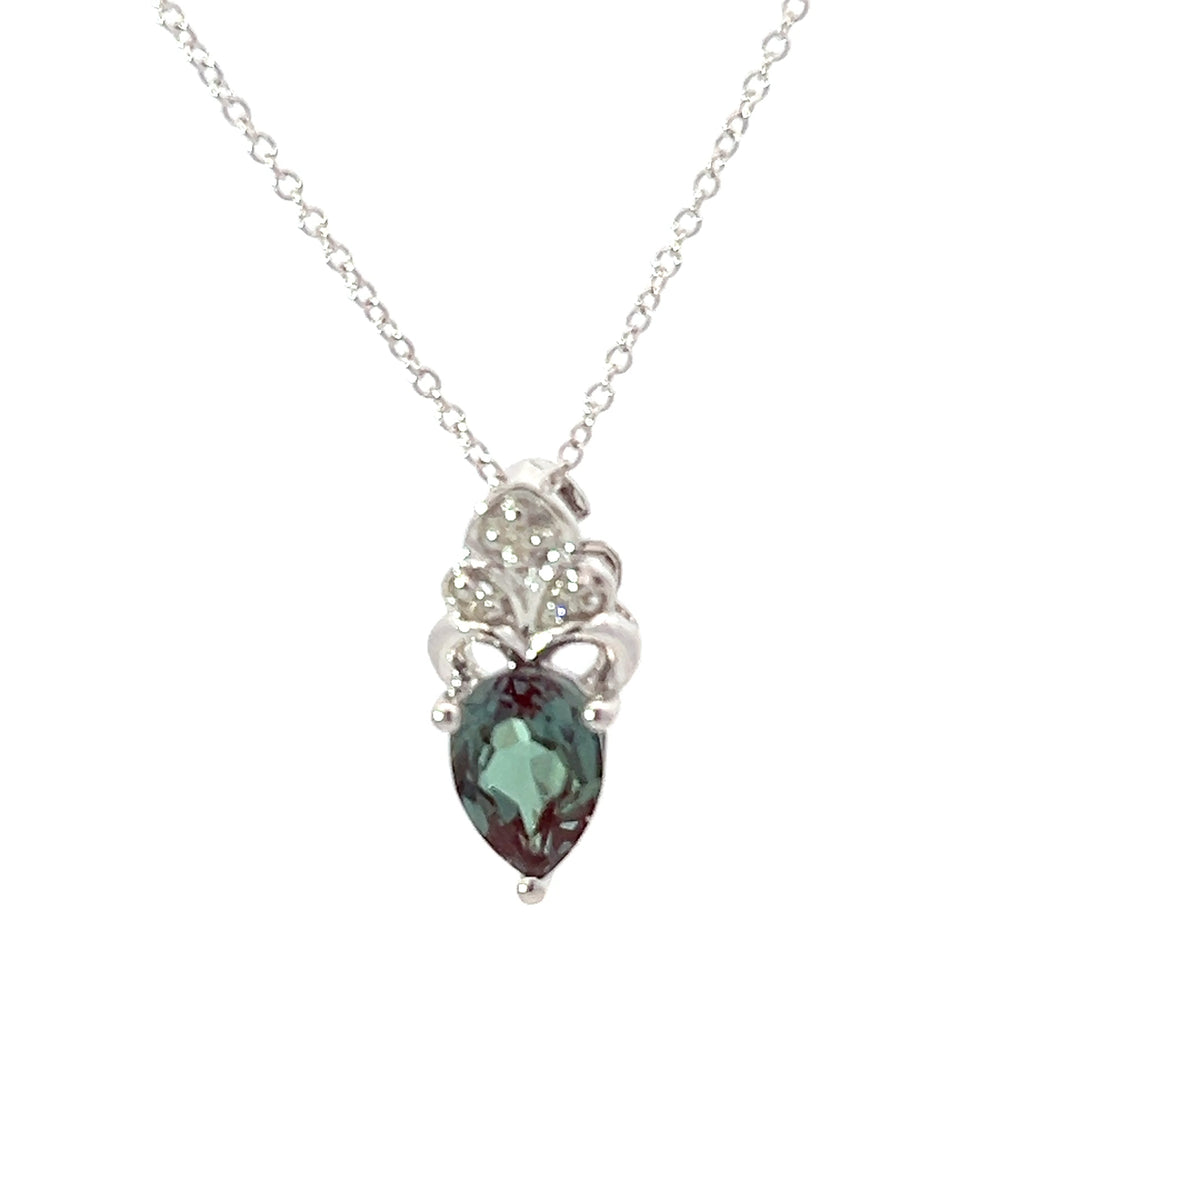 10K White Gold 7x5mm Pear Cut Created Alexandrite and 0.018cttw Diamond Necklace - 18 Inches